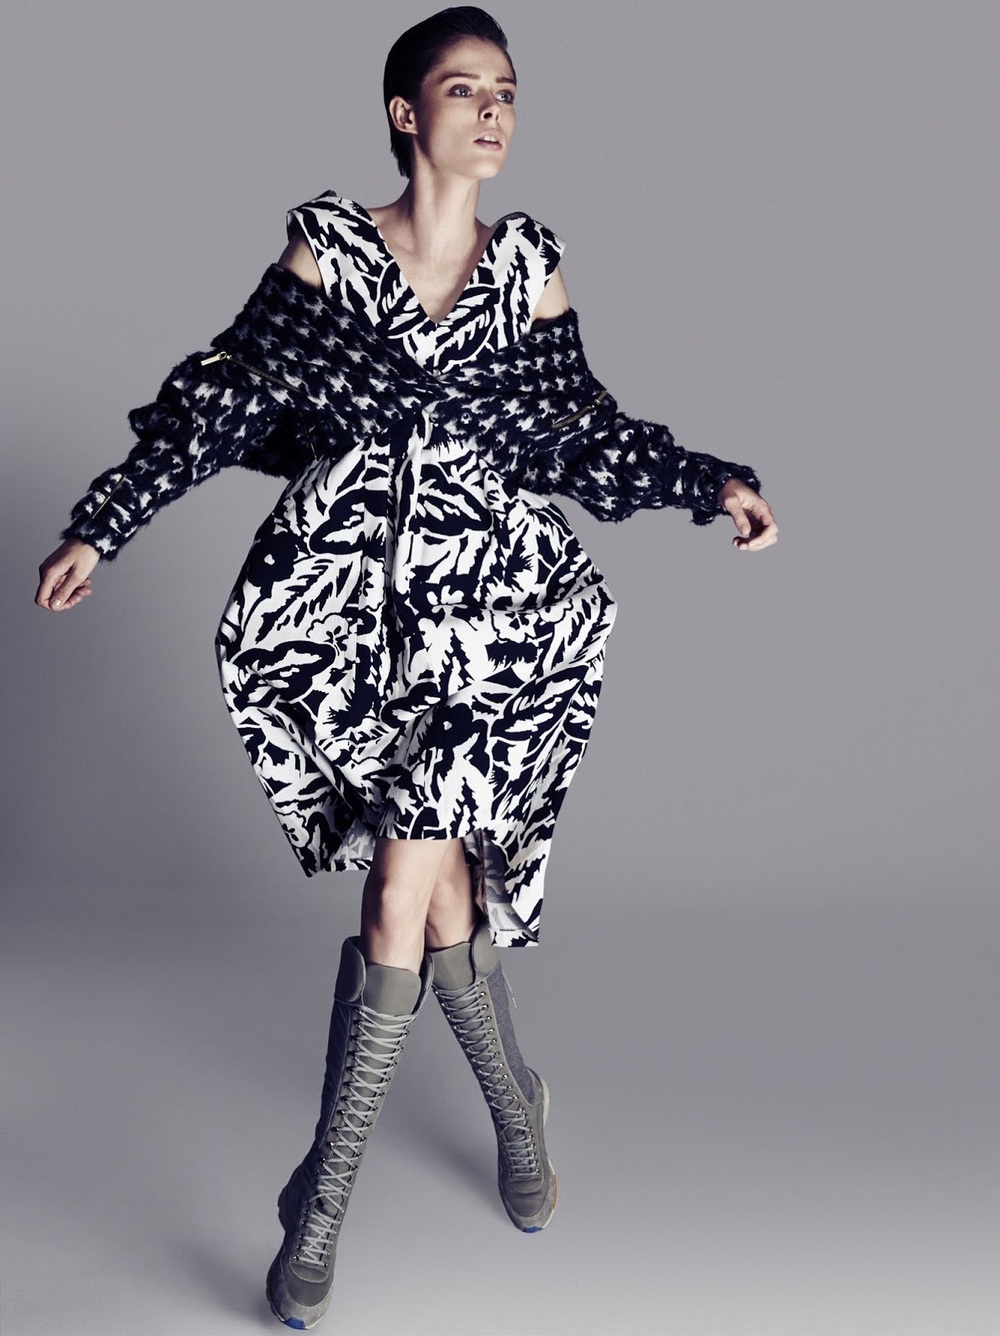 Coco Rocha's Pattern Poses By Darren McDonald For Sunday Style November ...